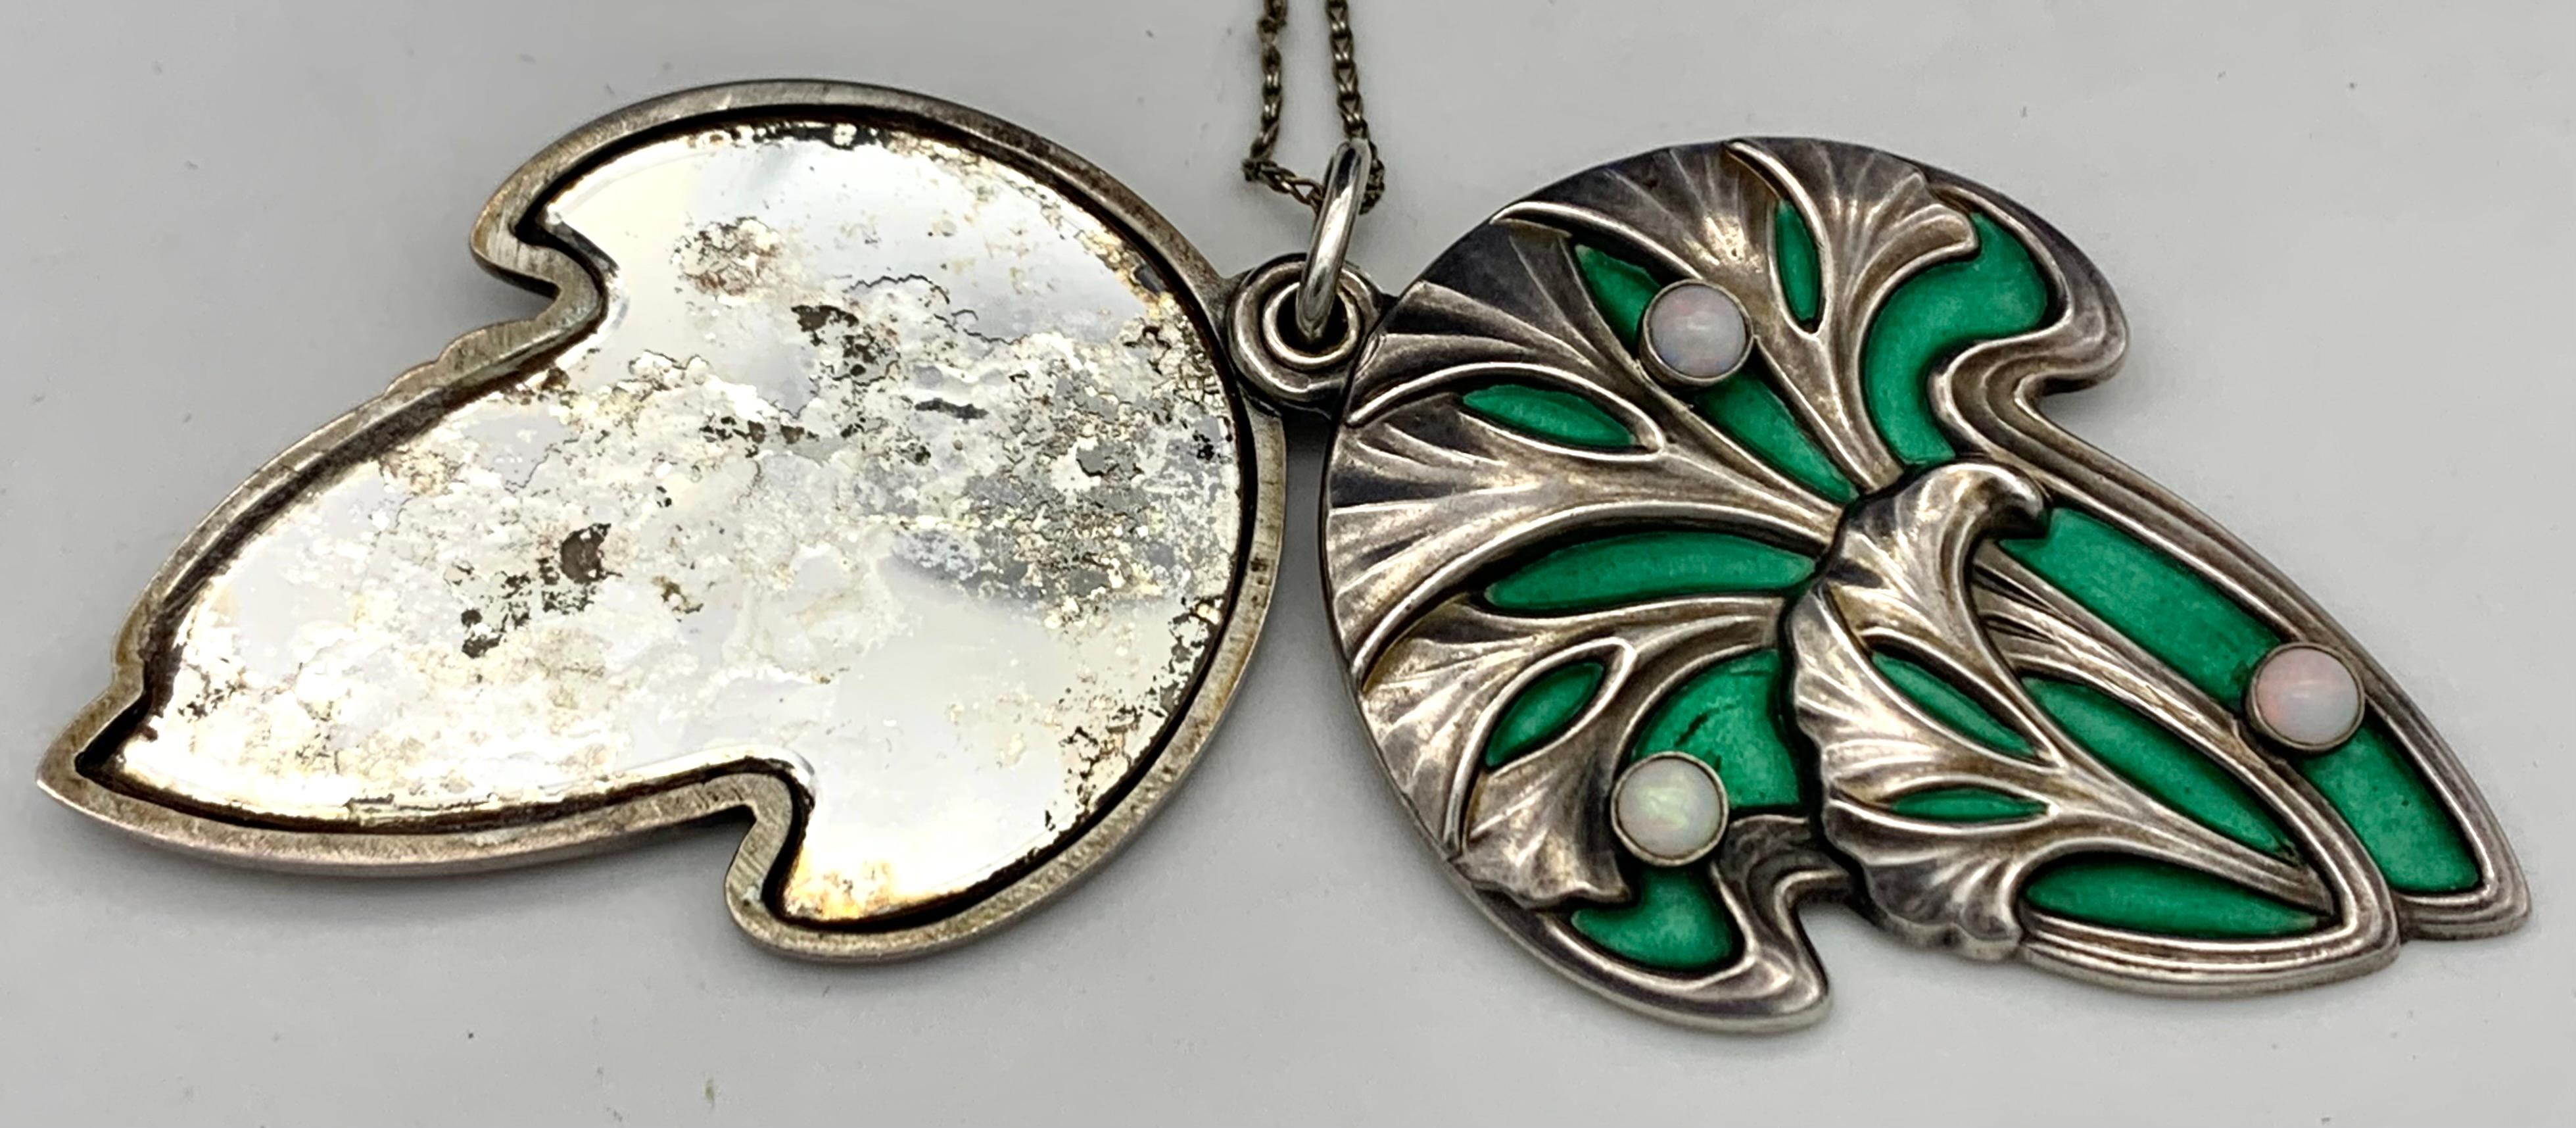 Antique Art Nouveau Pendant Necklace Gingko Leaves Opal Green Enamel Silver In Good Condition For Sale In Munich, Bavaria